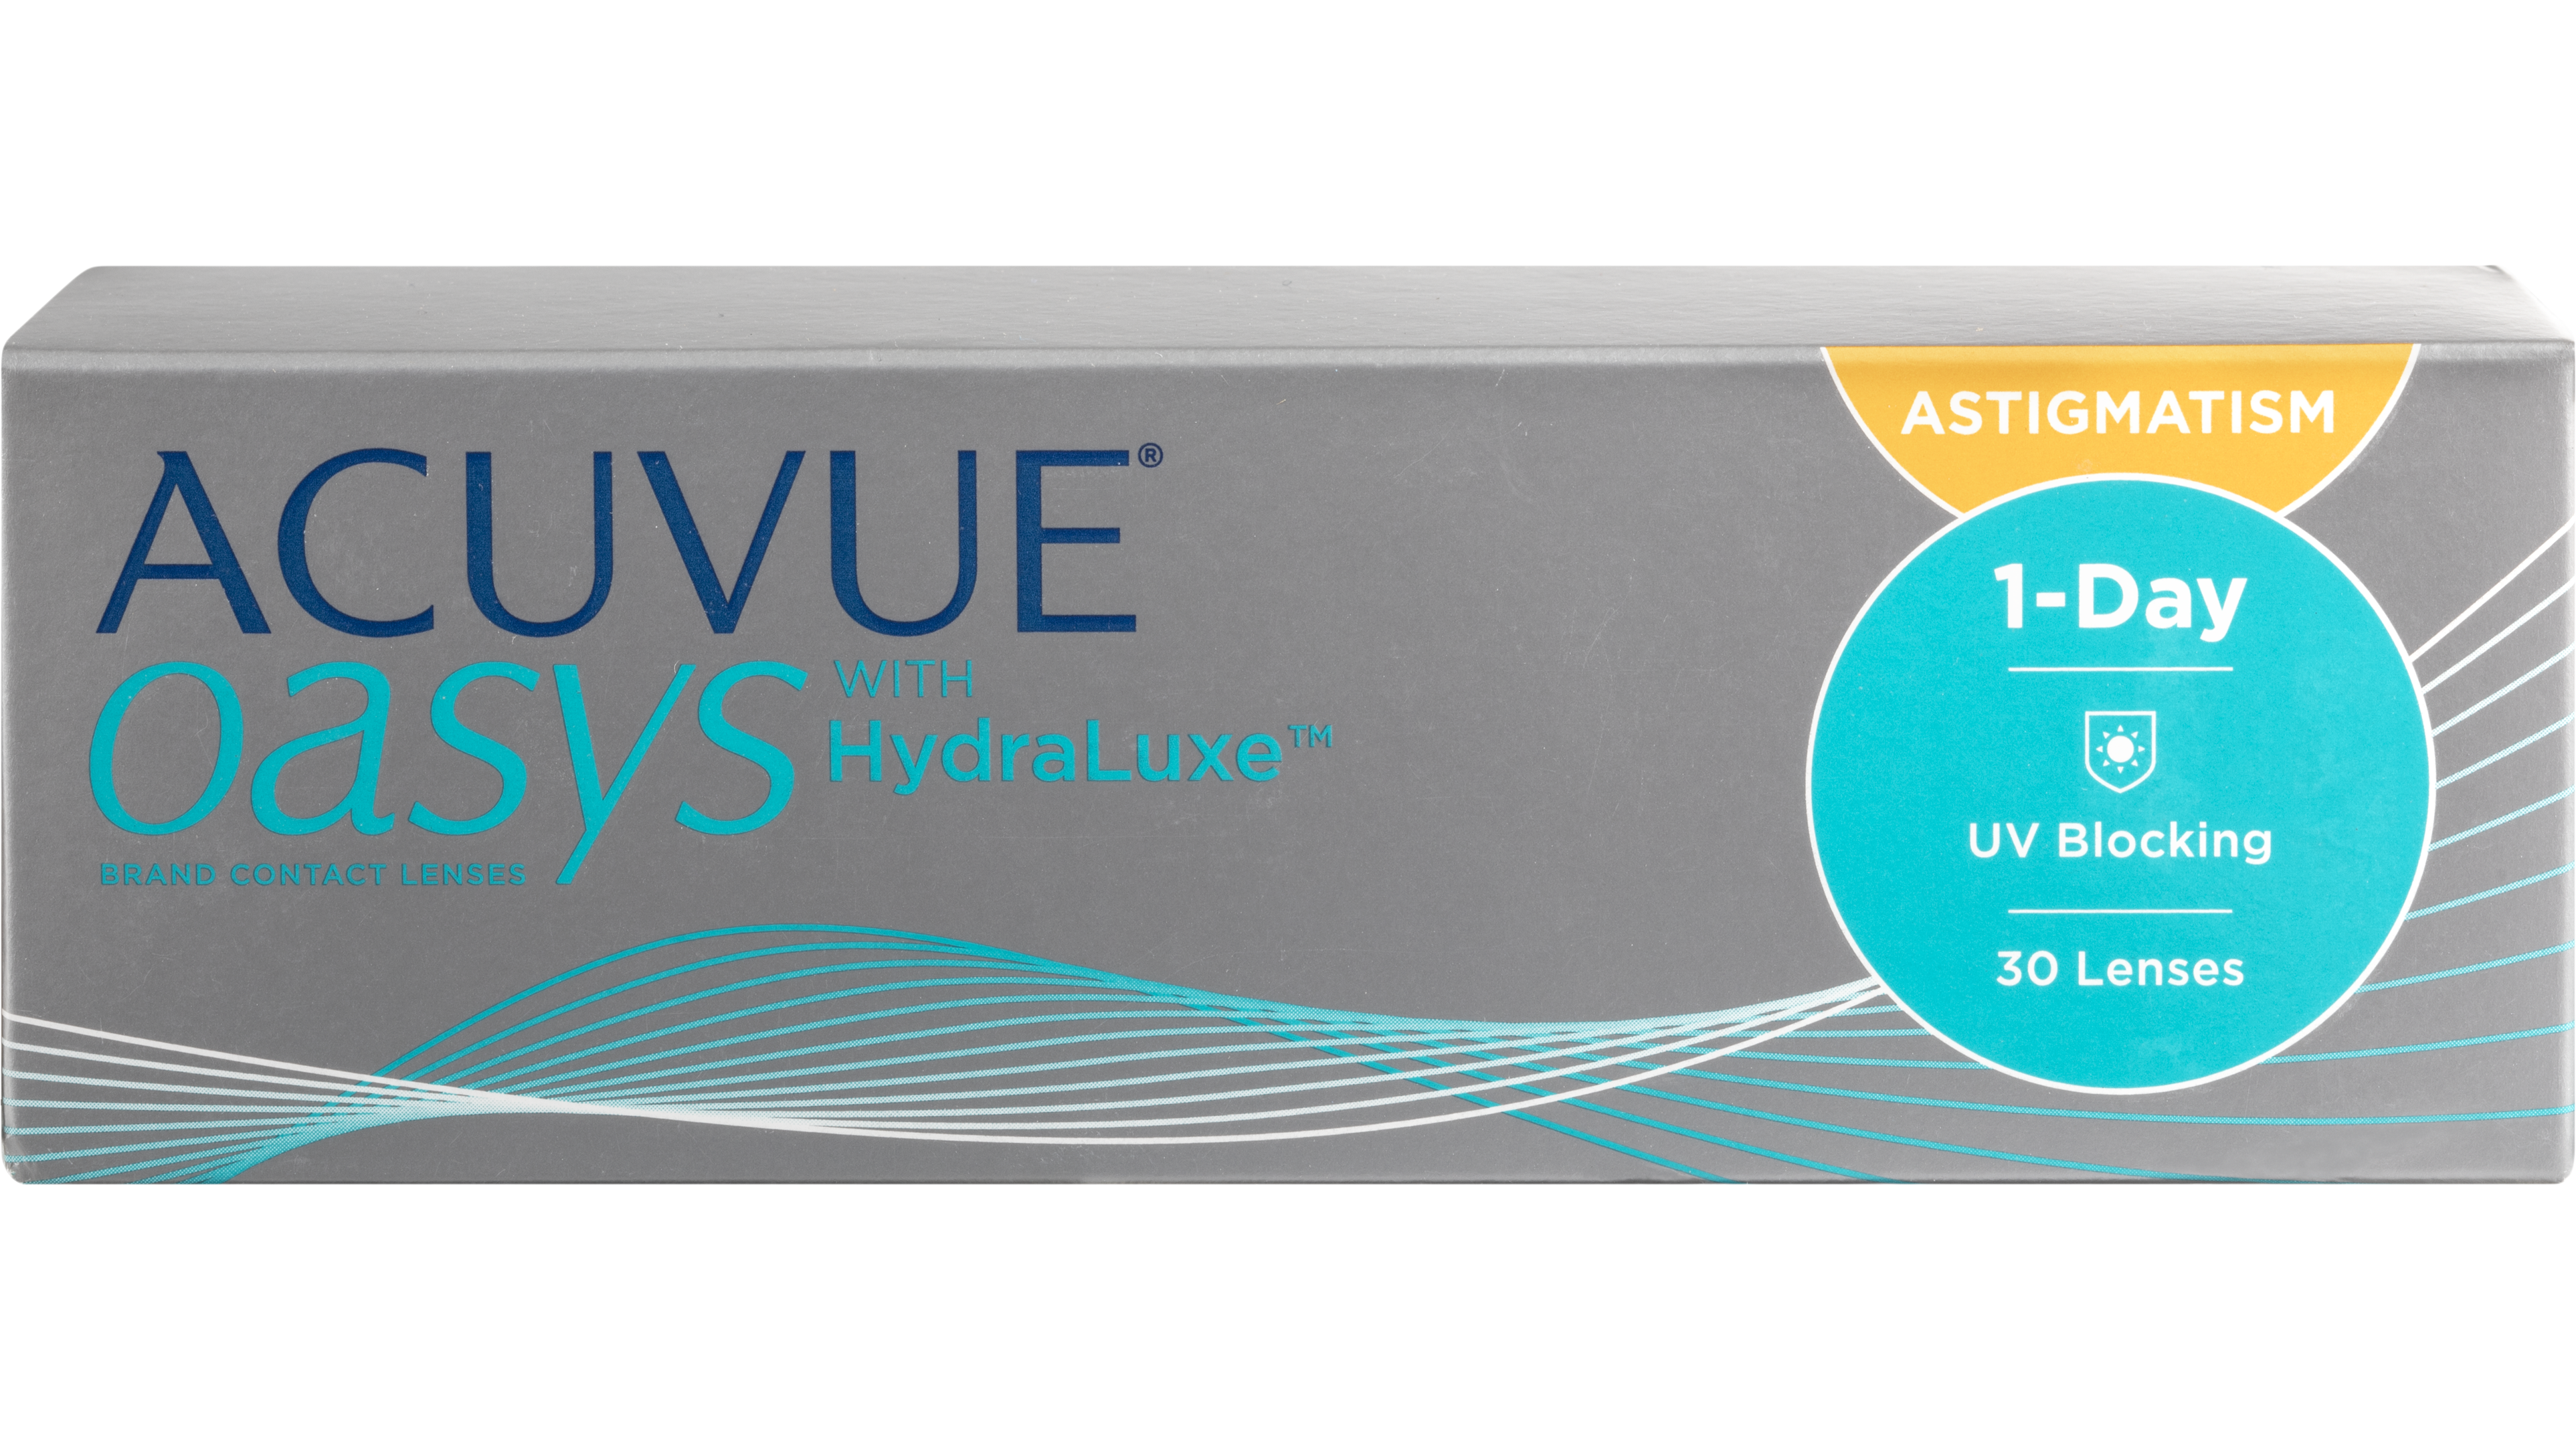 Front 1-Day Acuvue Oasys Astigmatism 30 unidades